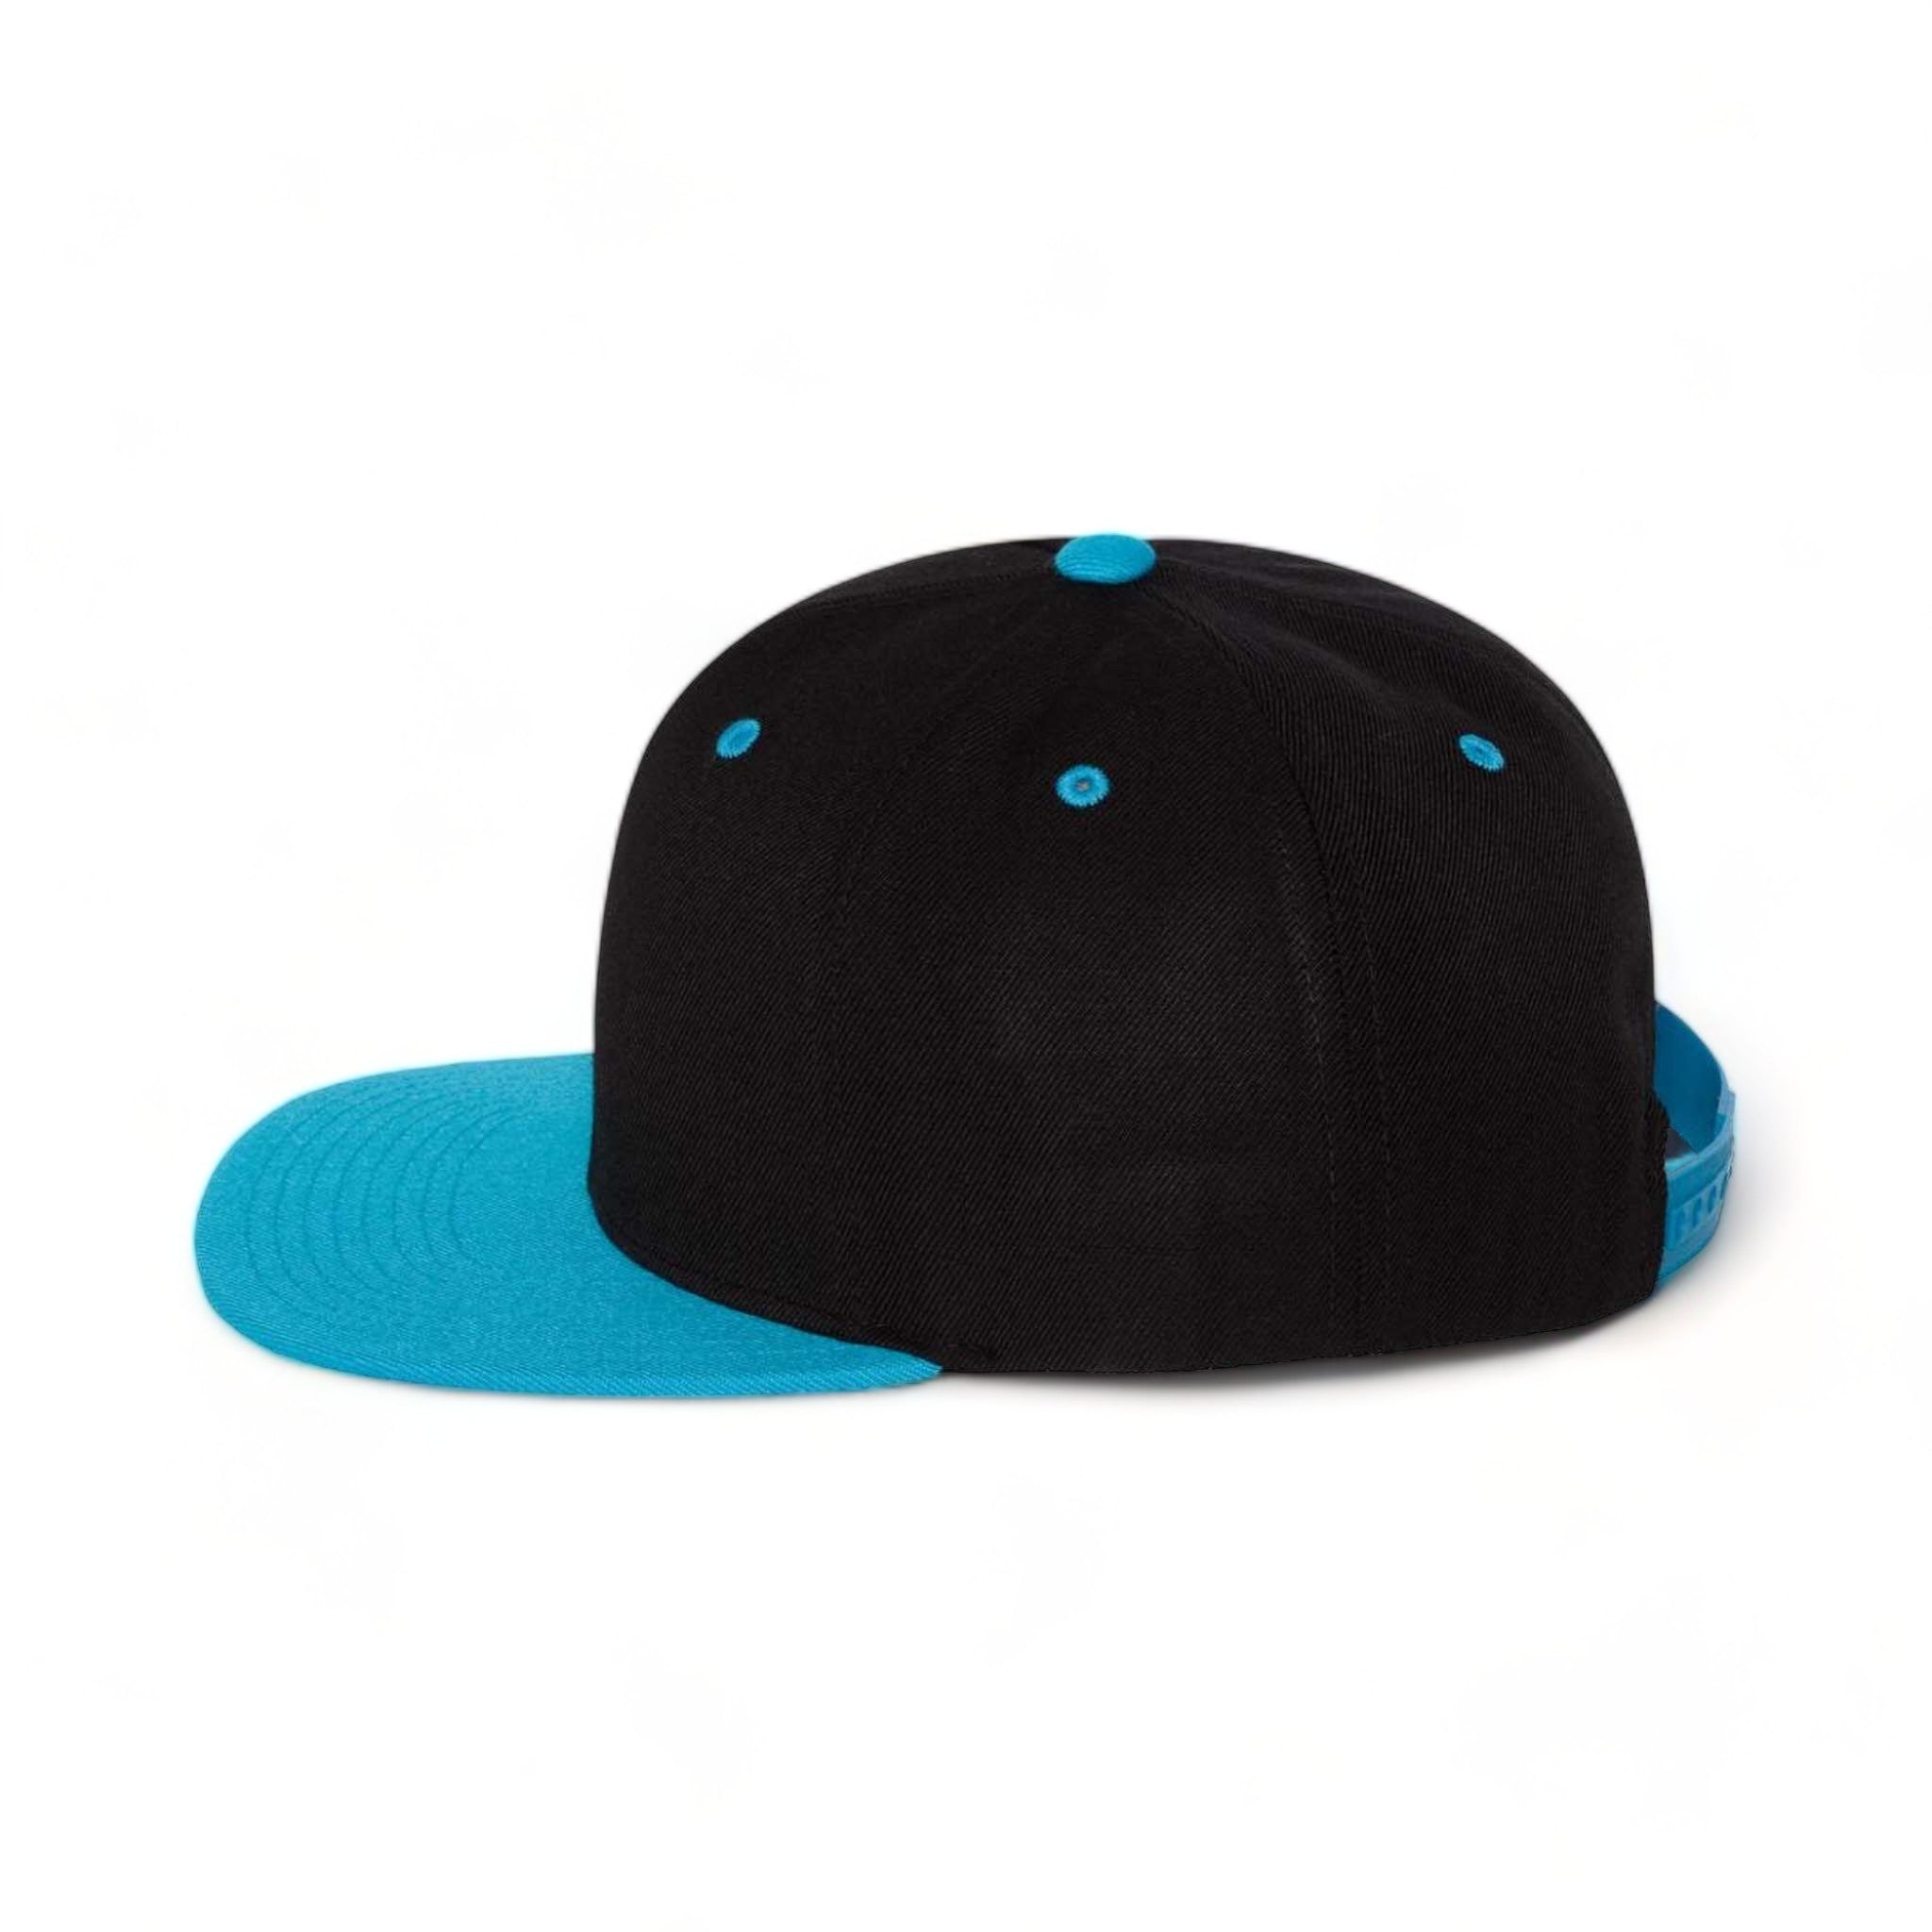 Side view of YP Classics 6089M custom hat in black and teal